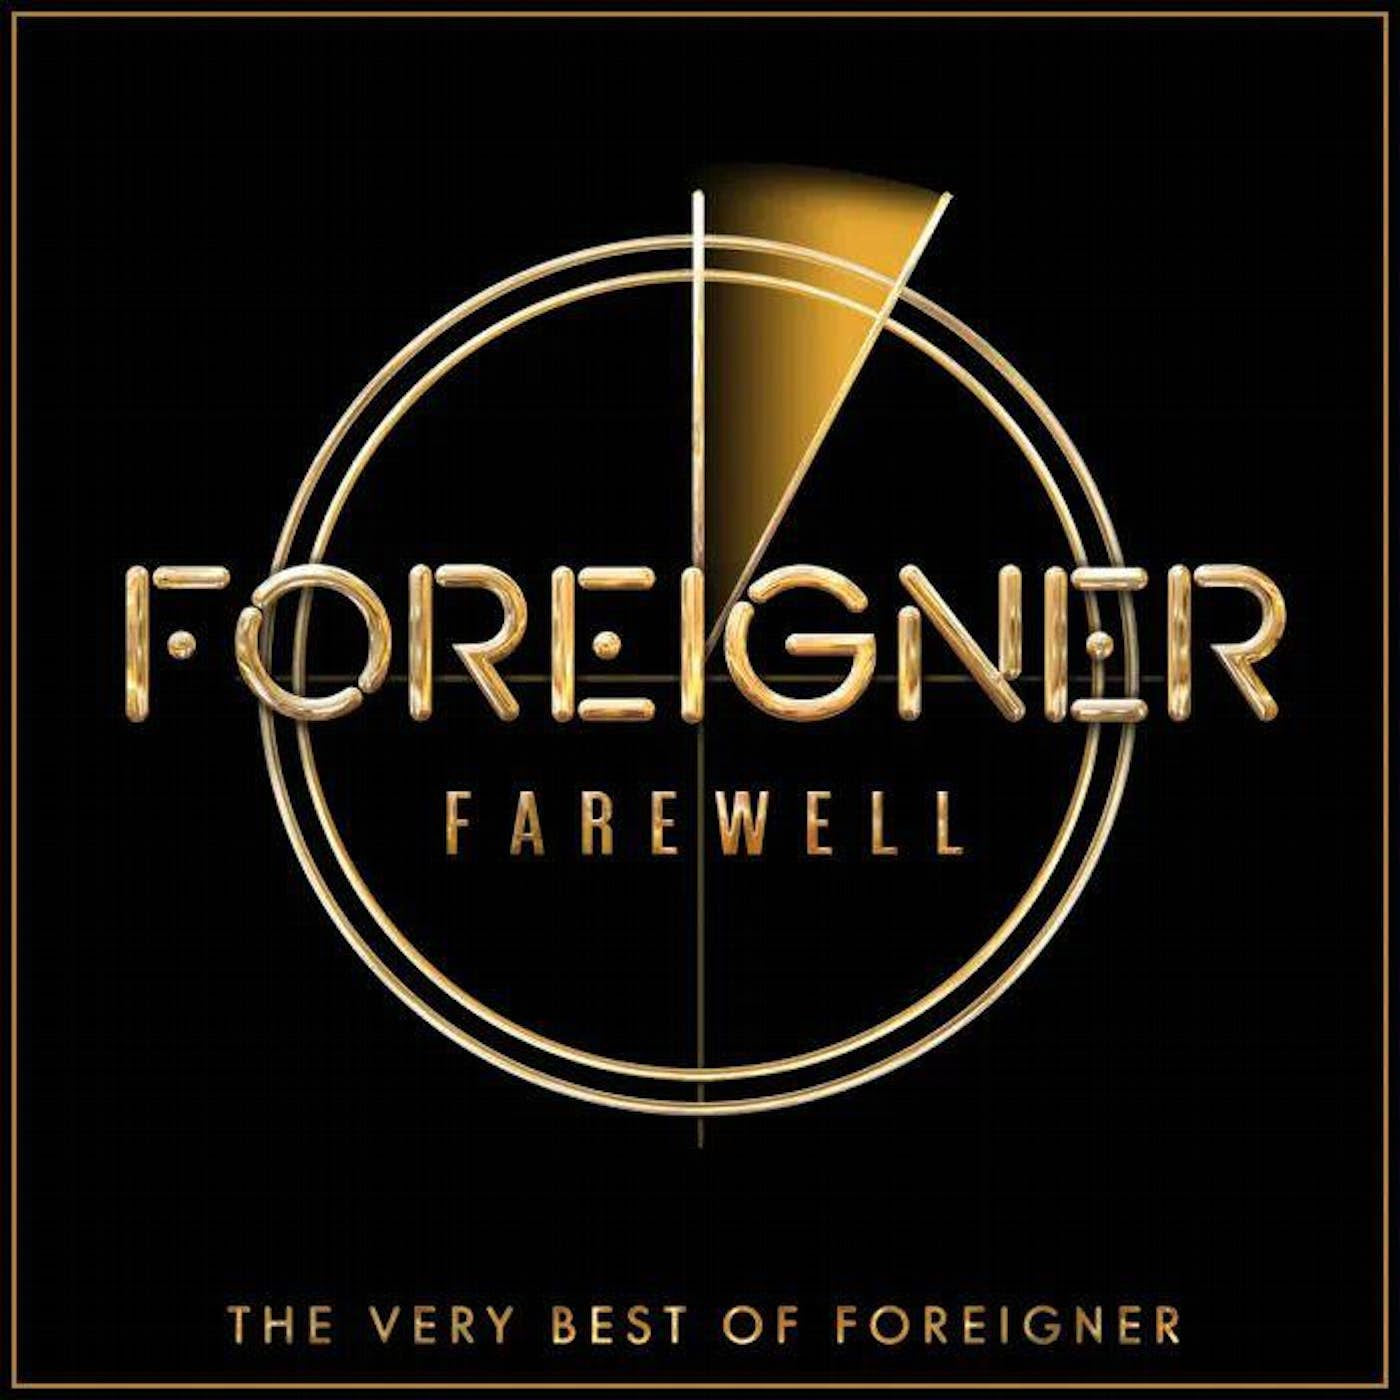 Foreigner - Farewell The Very Best Of Foreigner (Vinilo)